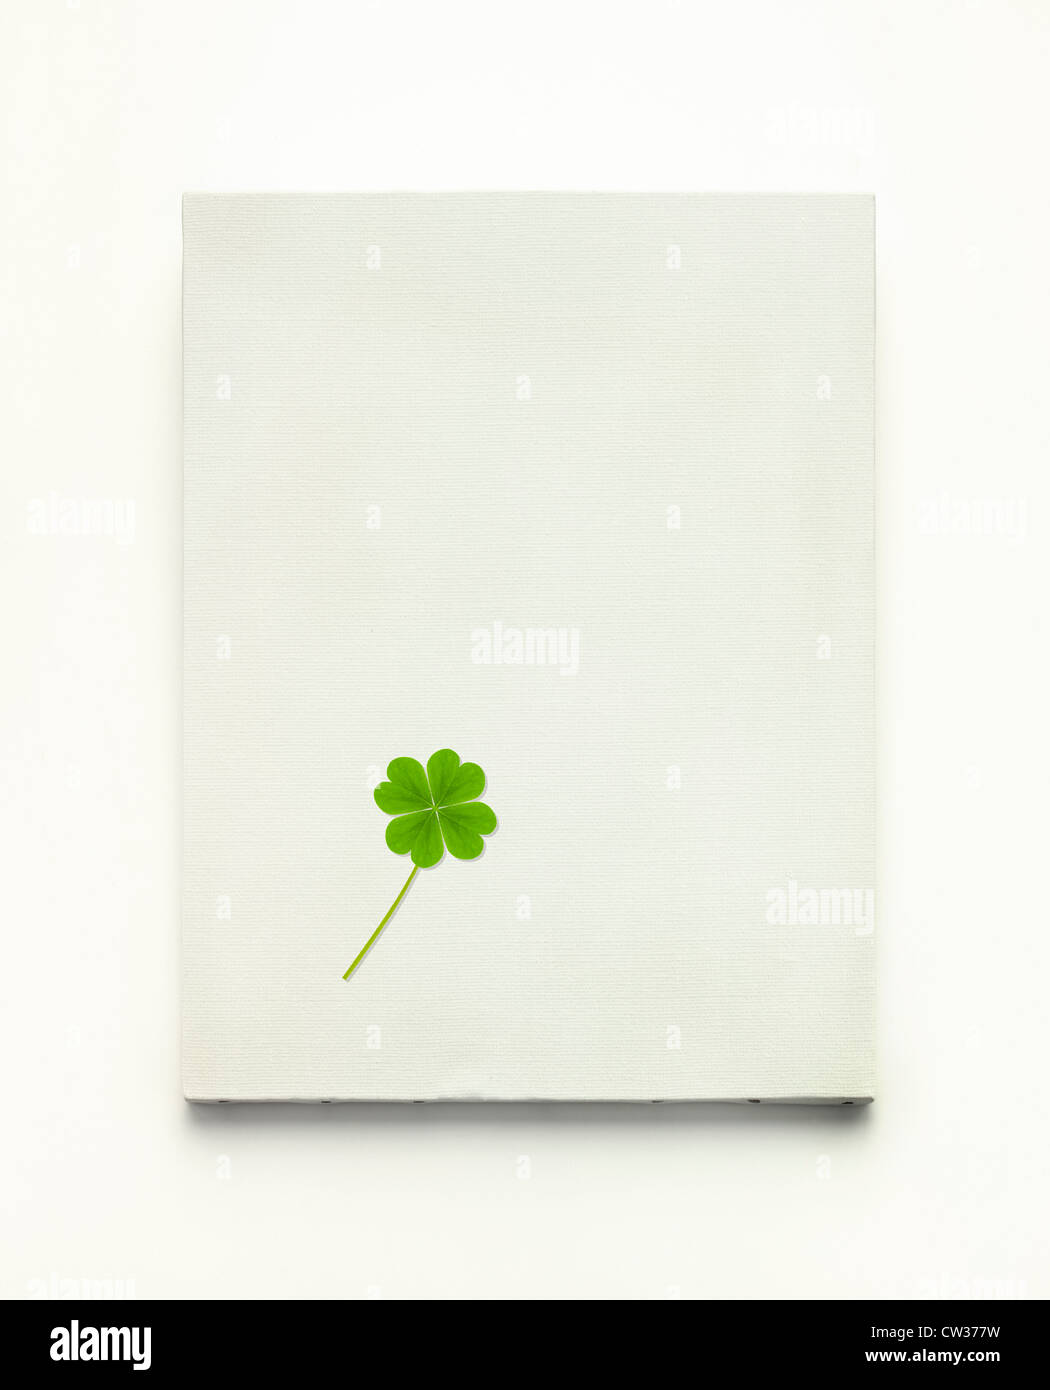 Four leafed clover on the canvas Stock Photo